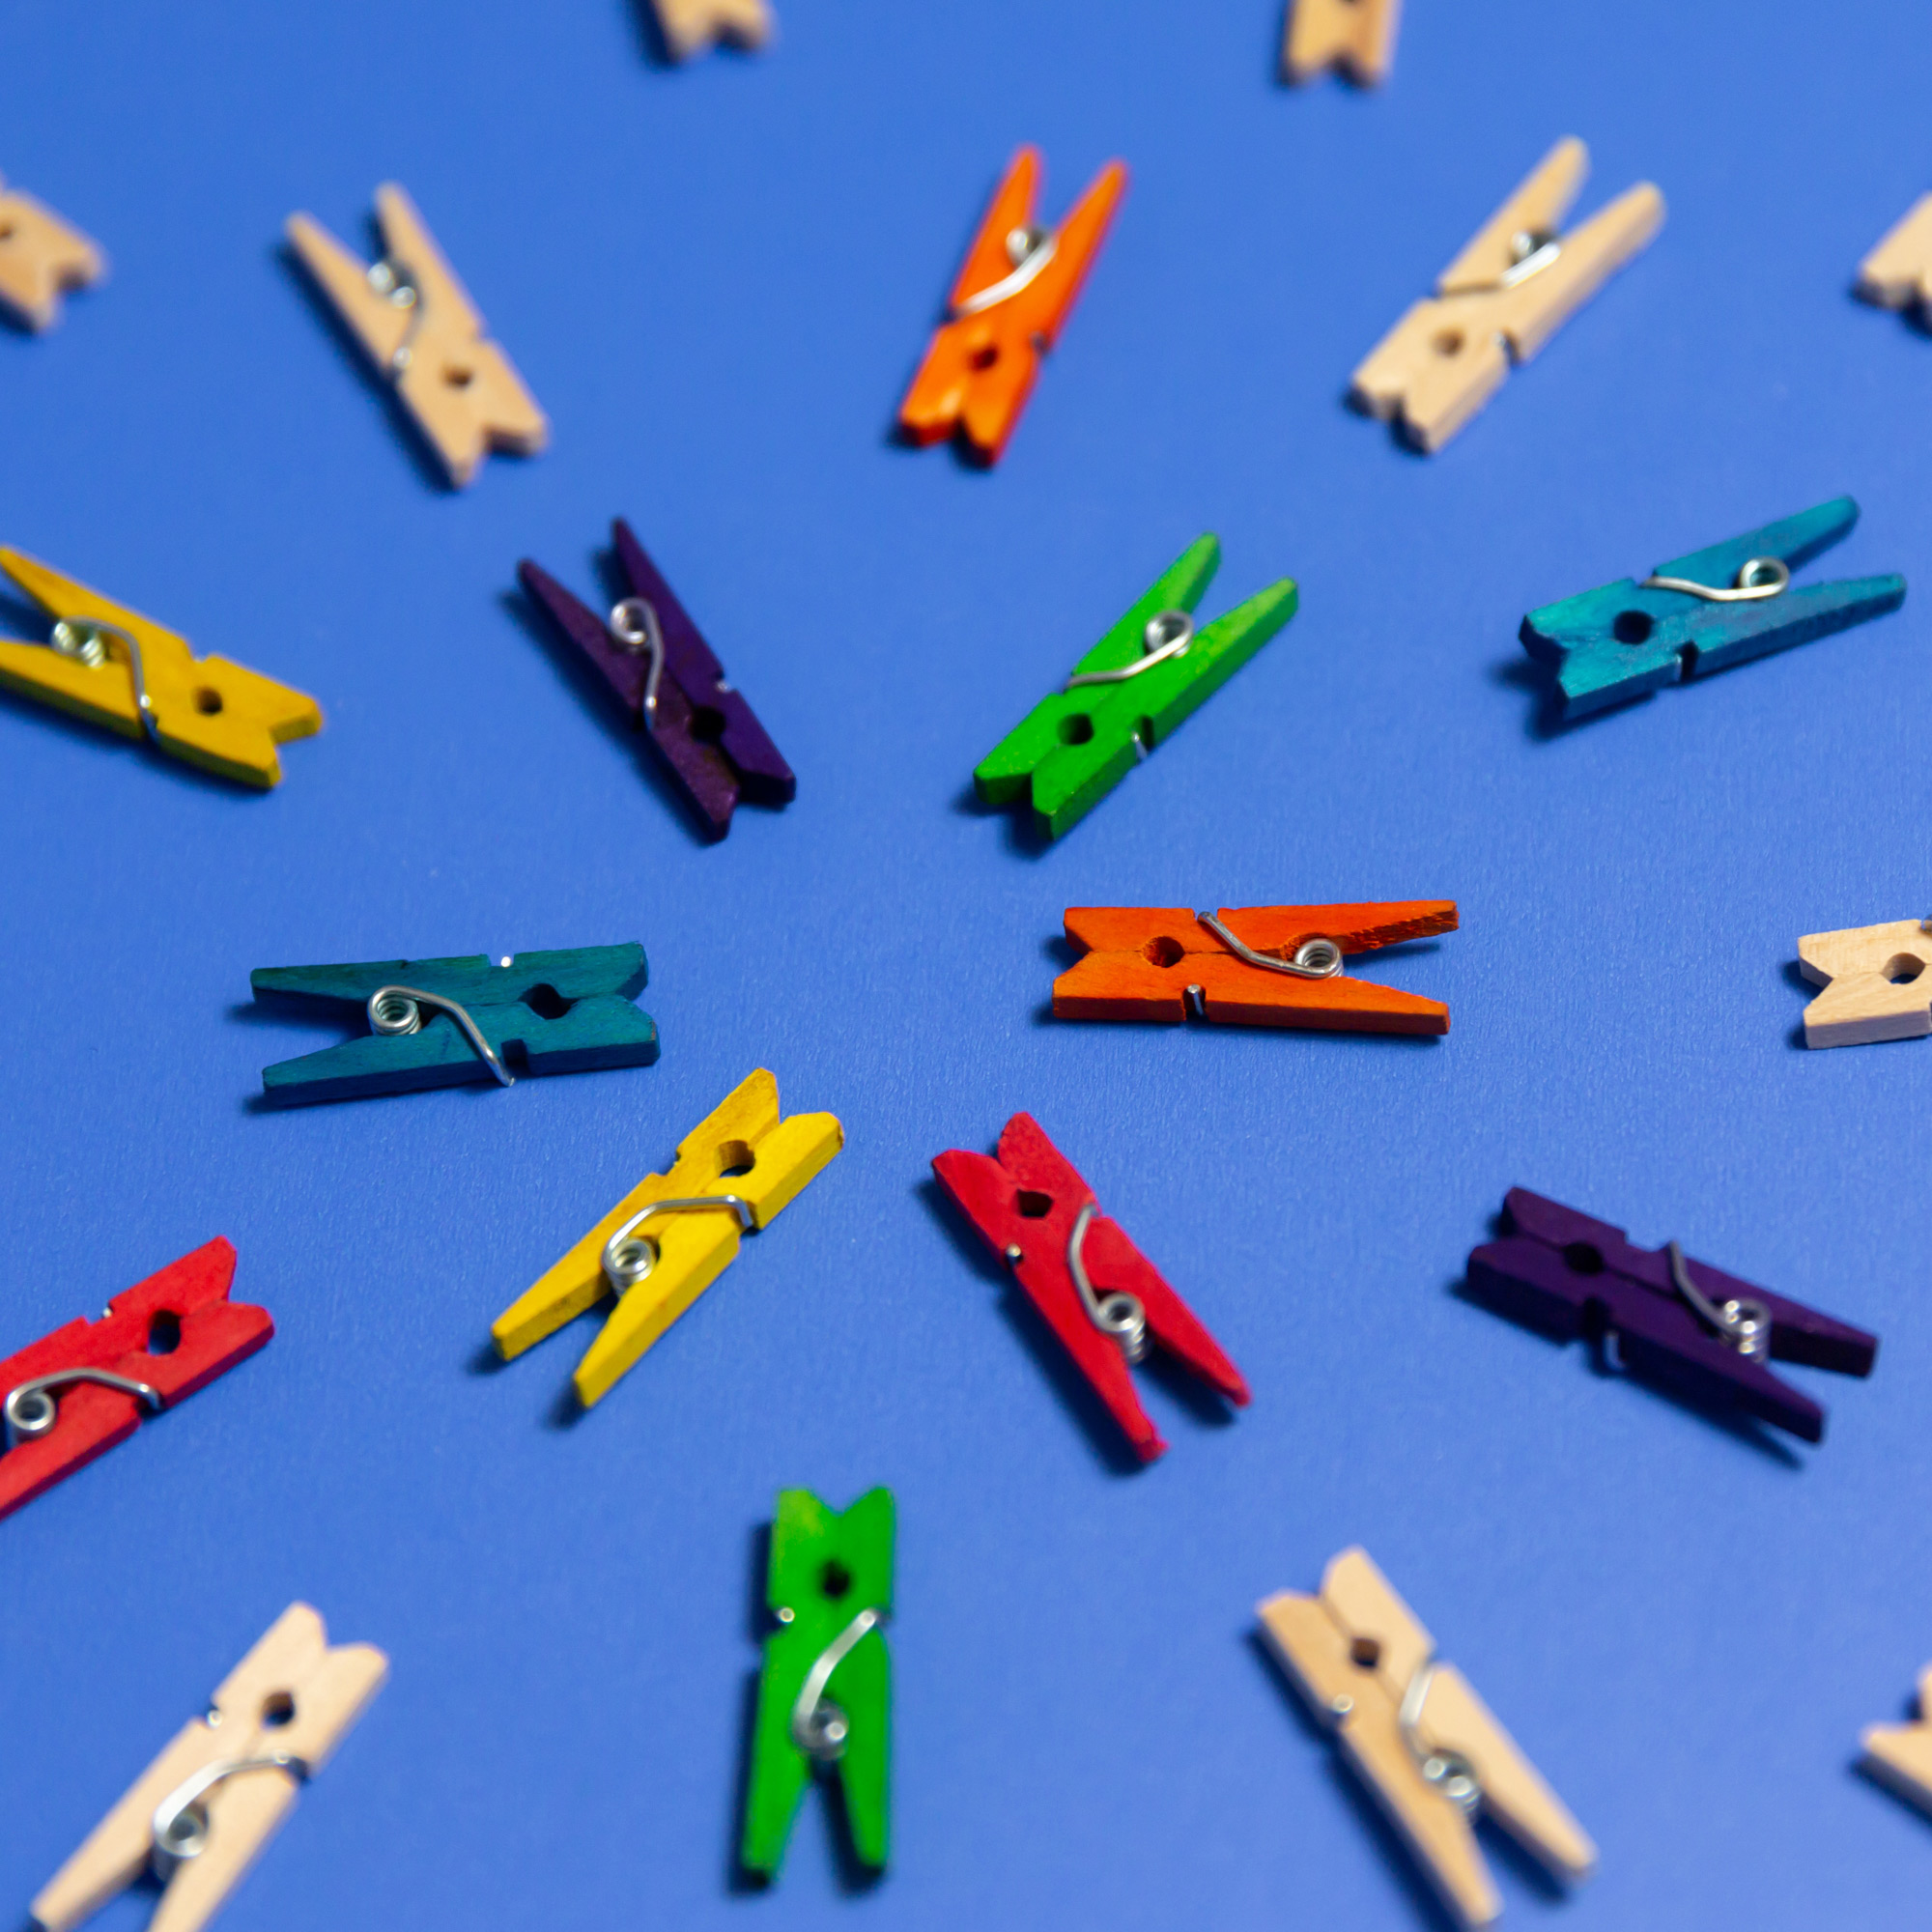 Miniature Clothespins (1-inch long)